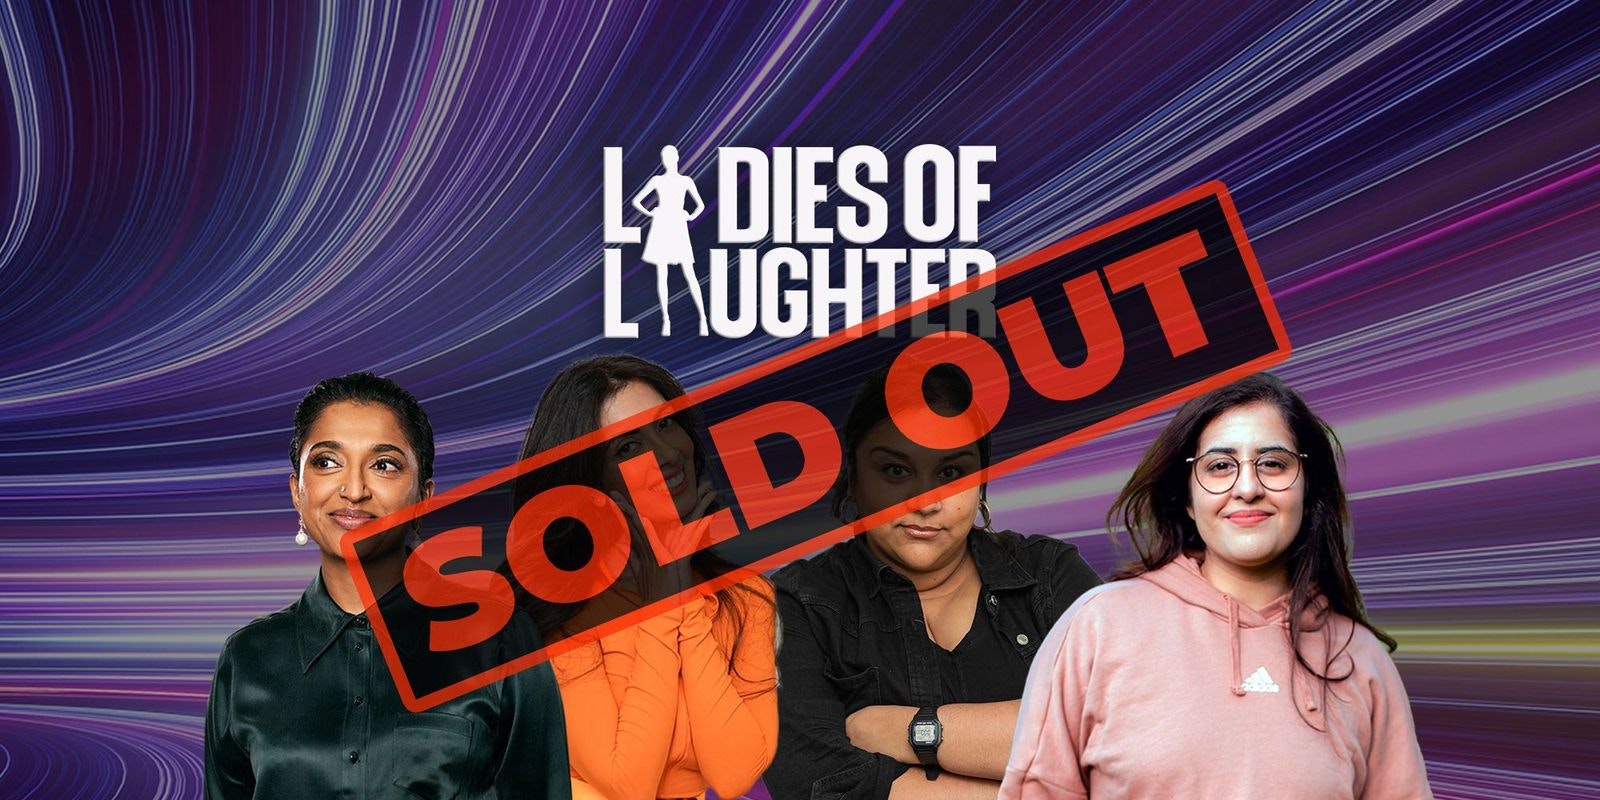 LOL : Ladies Of Laughter – Harrow ** SOLD OUT – Join Waiting List **